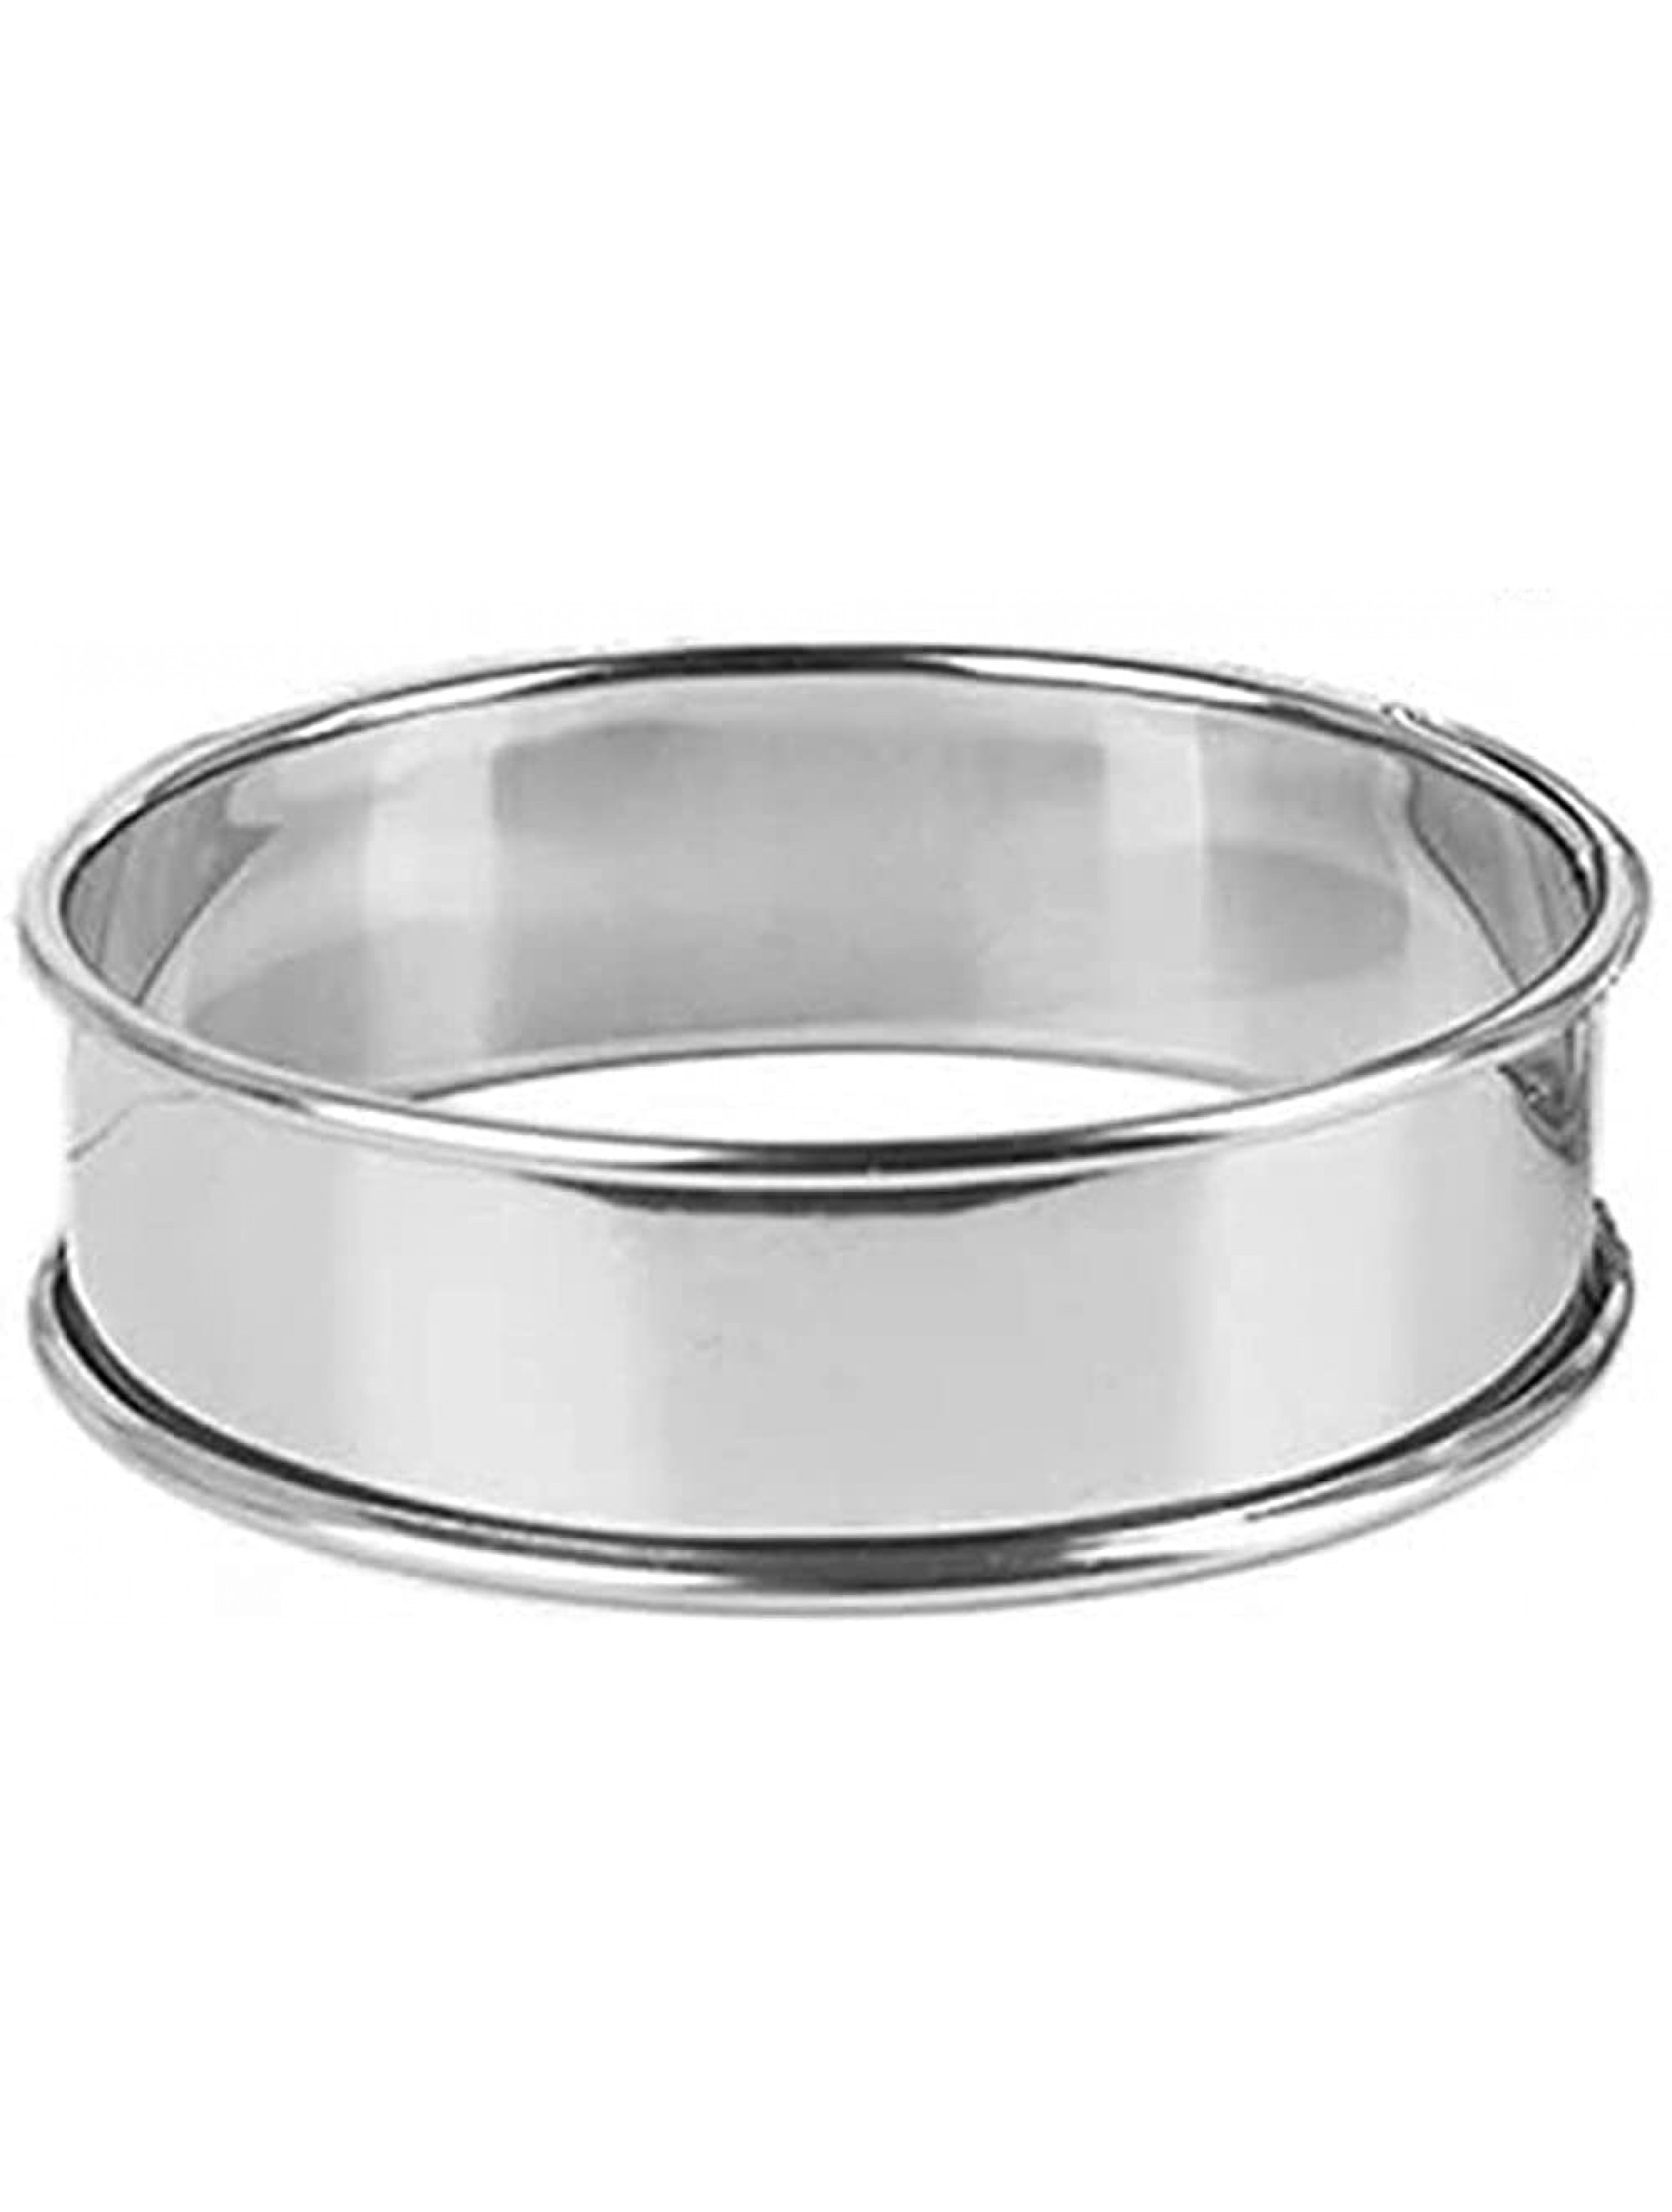 Giveyoulucky 8cm Stainless Steel Rolled Edge Fruit Pie Tarts Dessert Ring Muffin Crumpet Mold - BFI66JM7Y